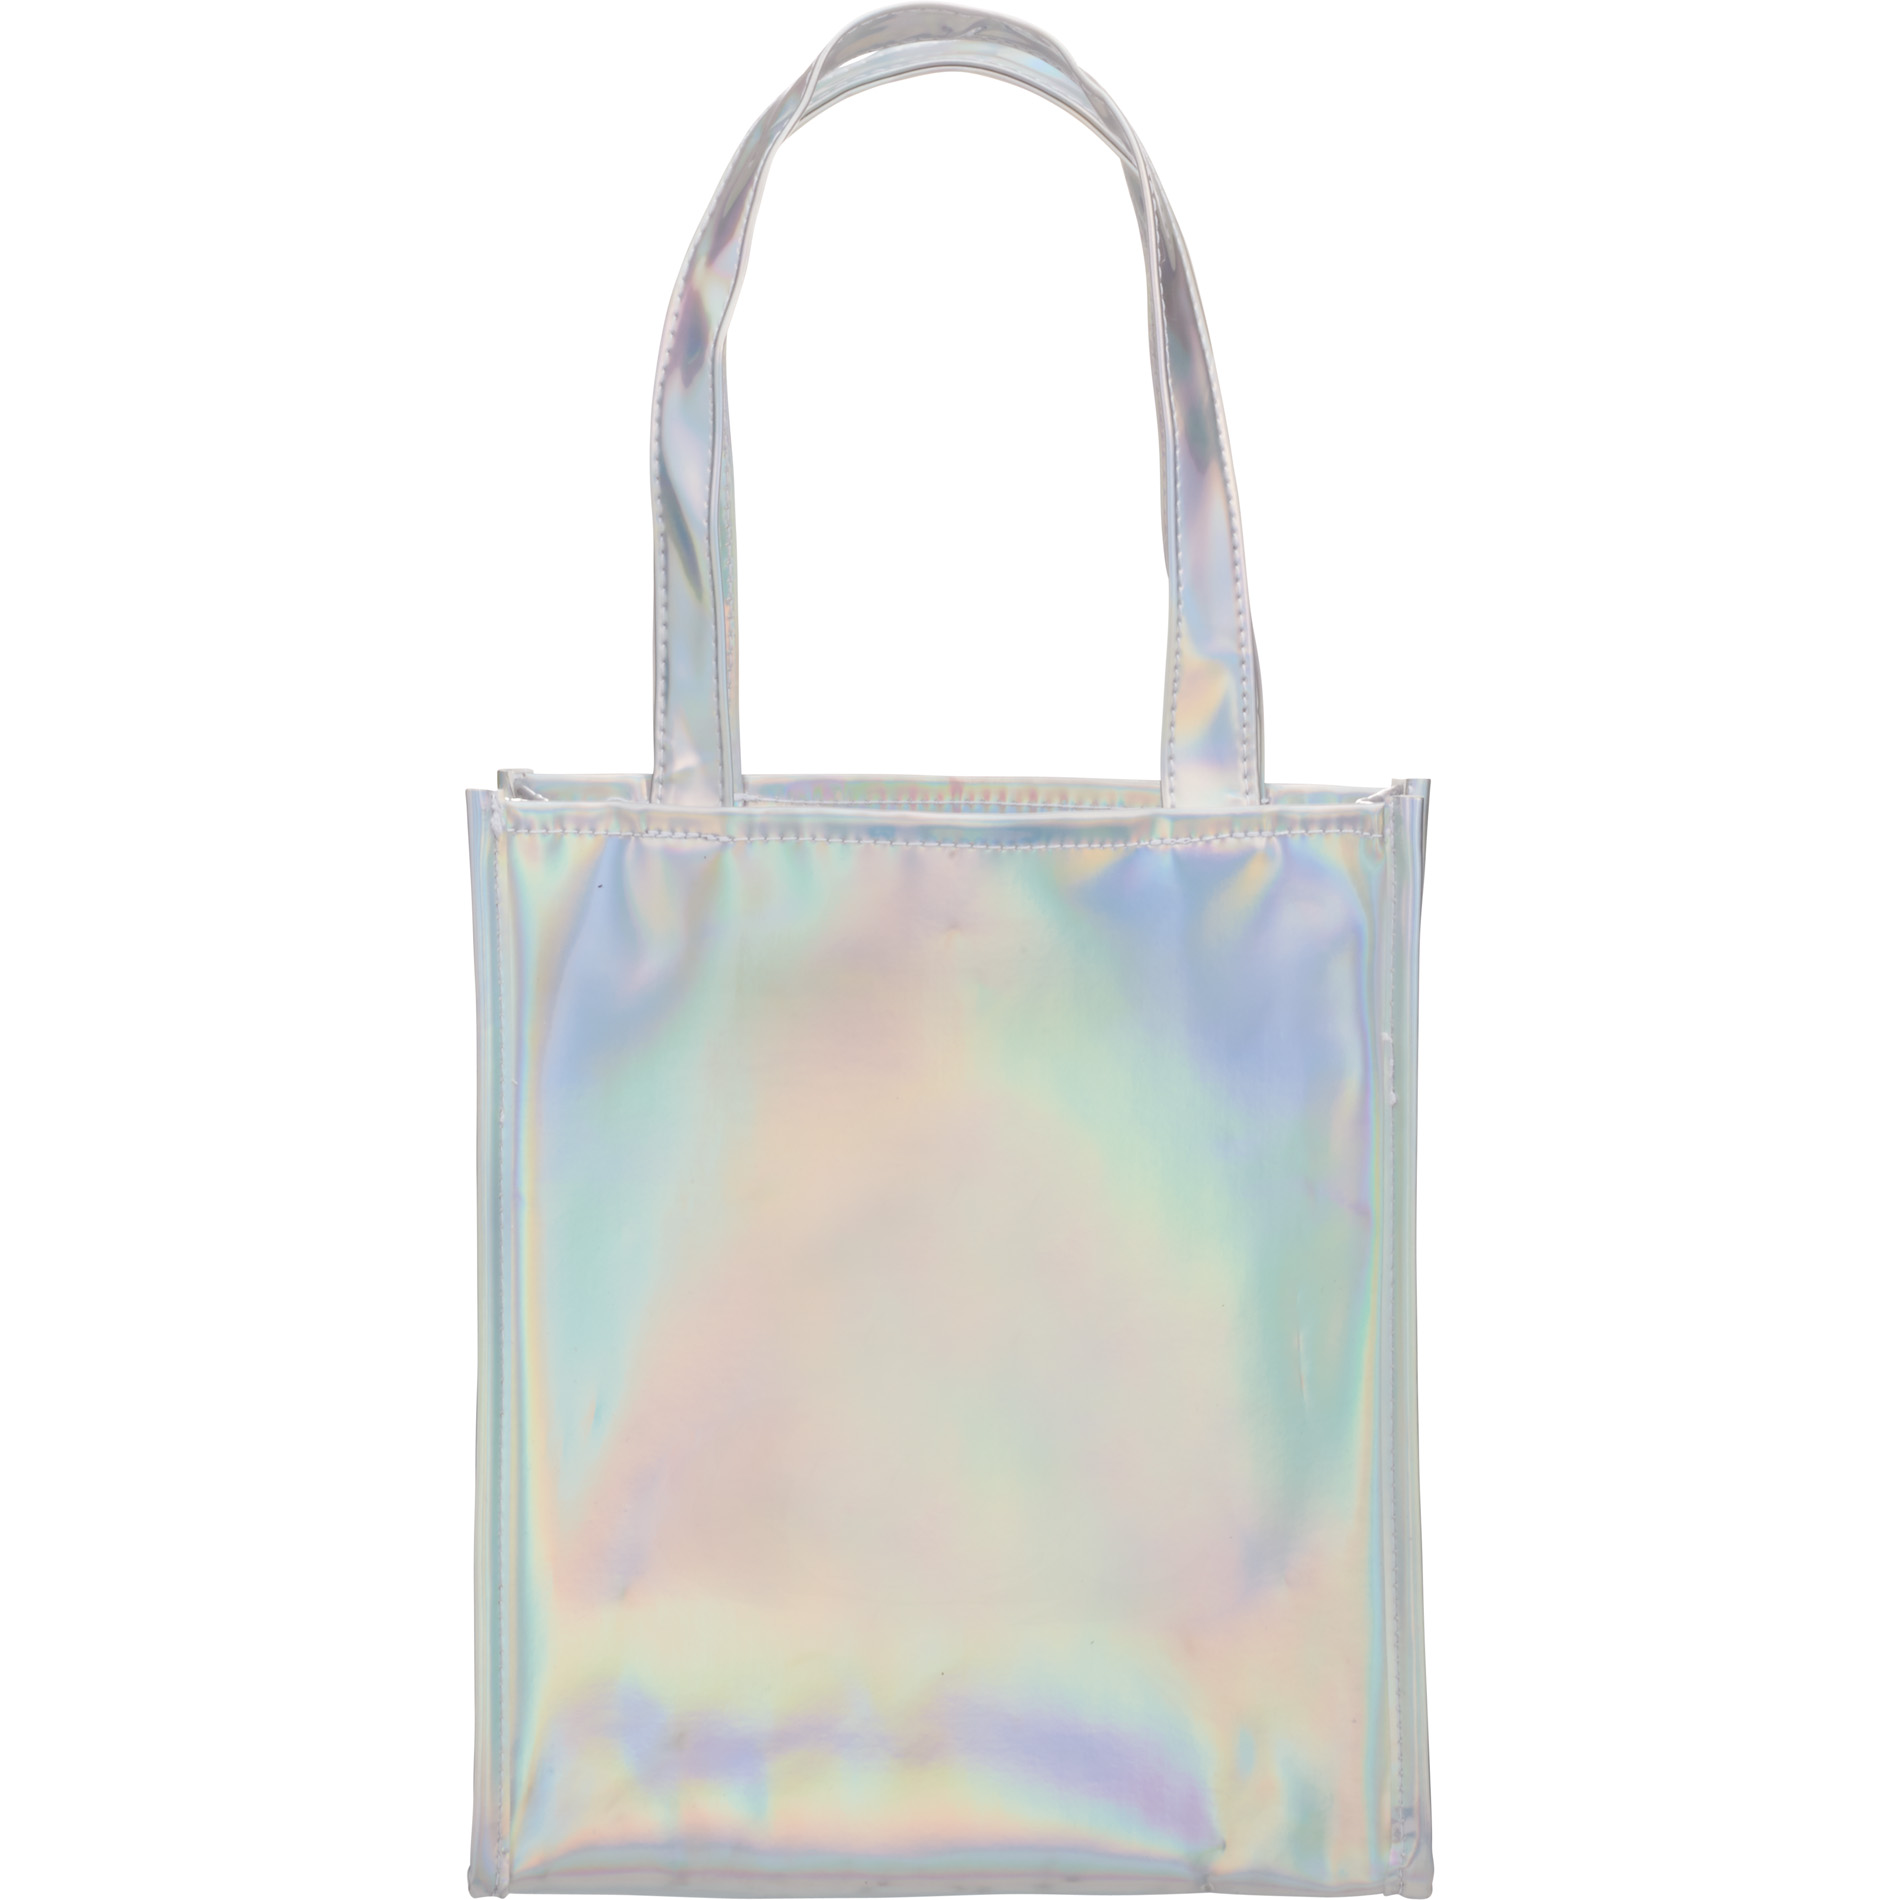 LEEDS 2190-12 - Holographic Gift Tote